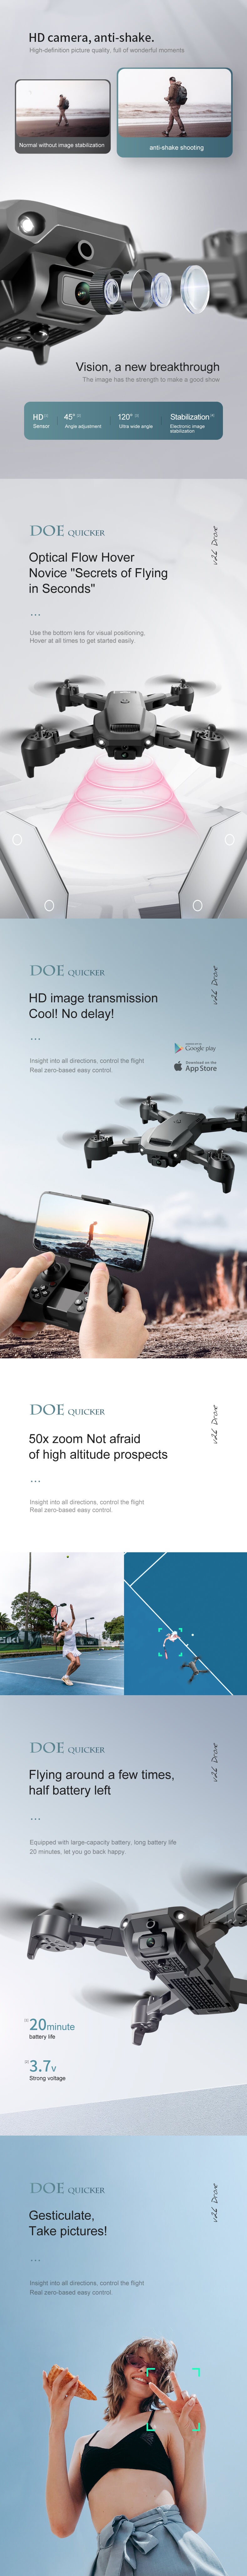 4DRC V23 obstacle avoidance drone with HD camera, newbie drone, foldable quadcopter, 1080P dual camera, Wifi transmission screen, one key takeoff, application program control flight, children's toy drone